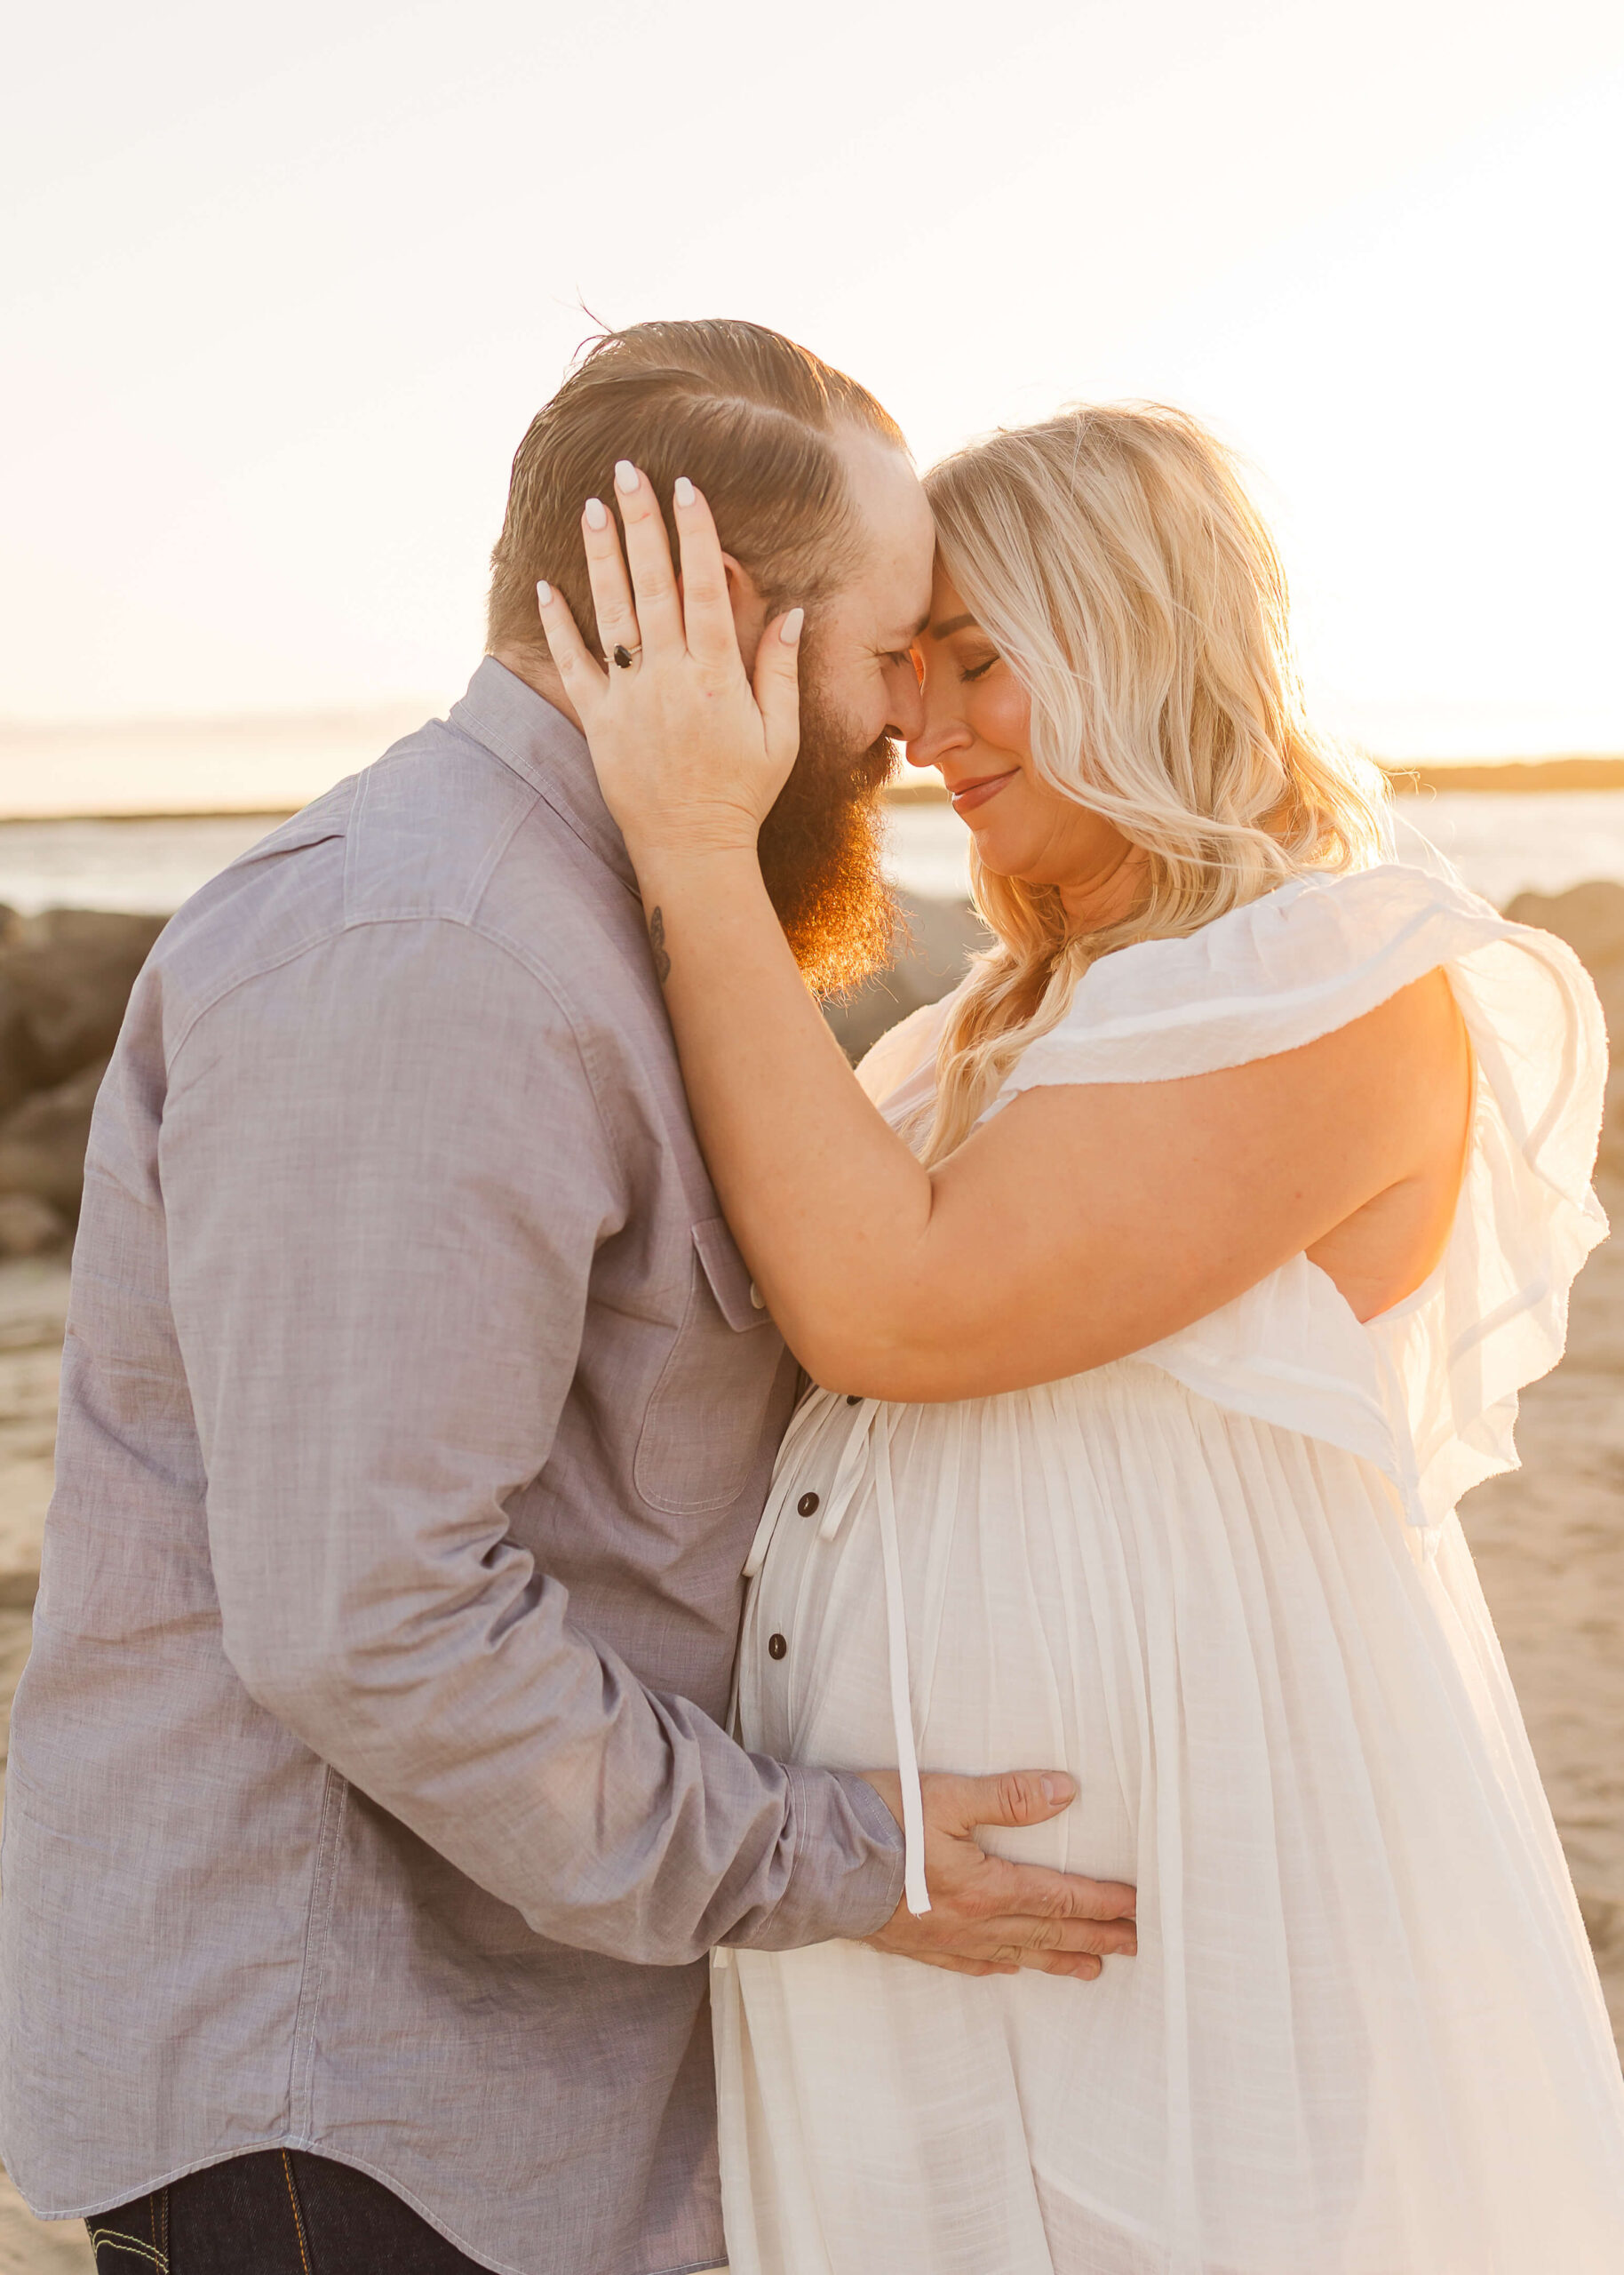 Couple embraced during maternity session at the beach in Los Angeles by Ashley Nicole.